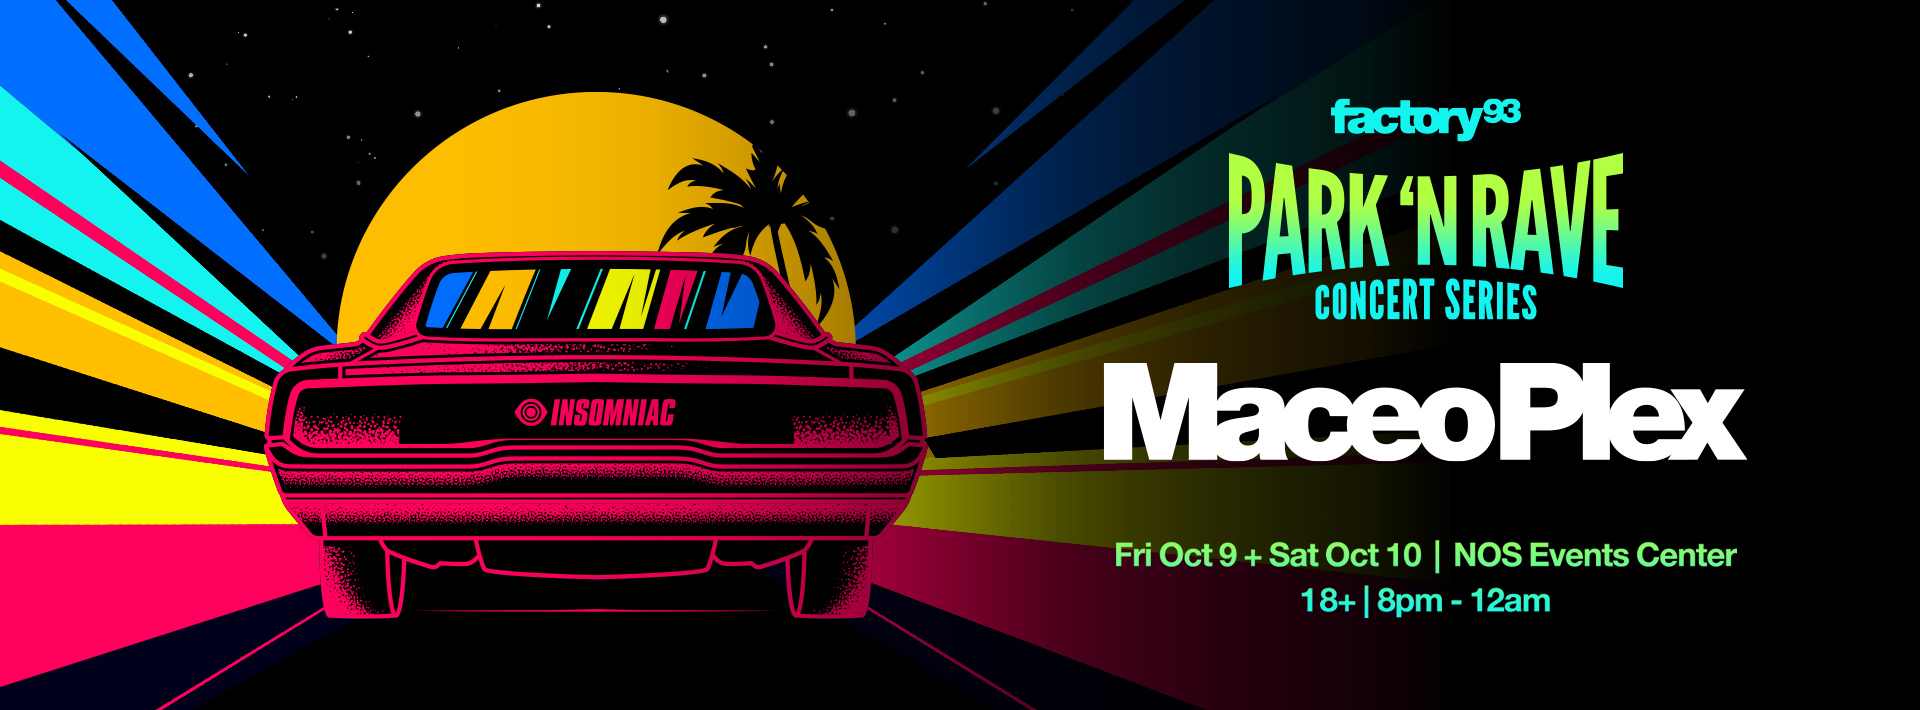 Park ‘N Rave with Maceo Plex – Night 1